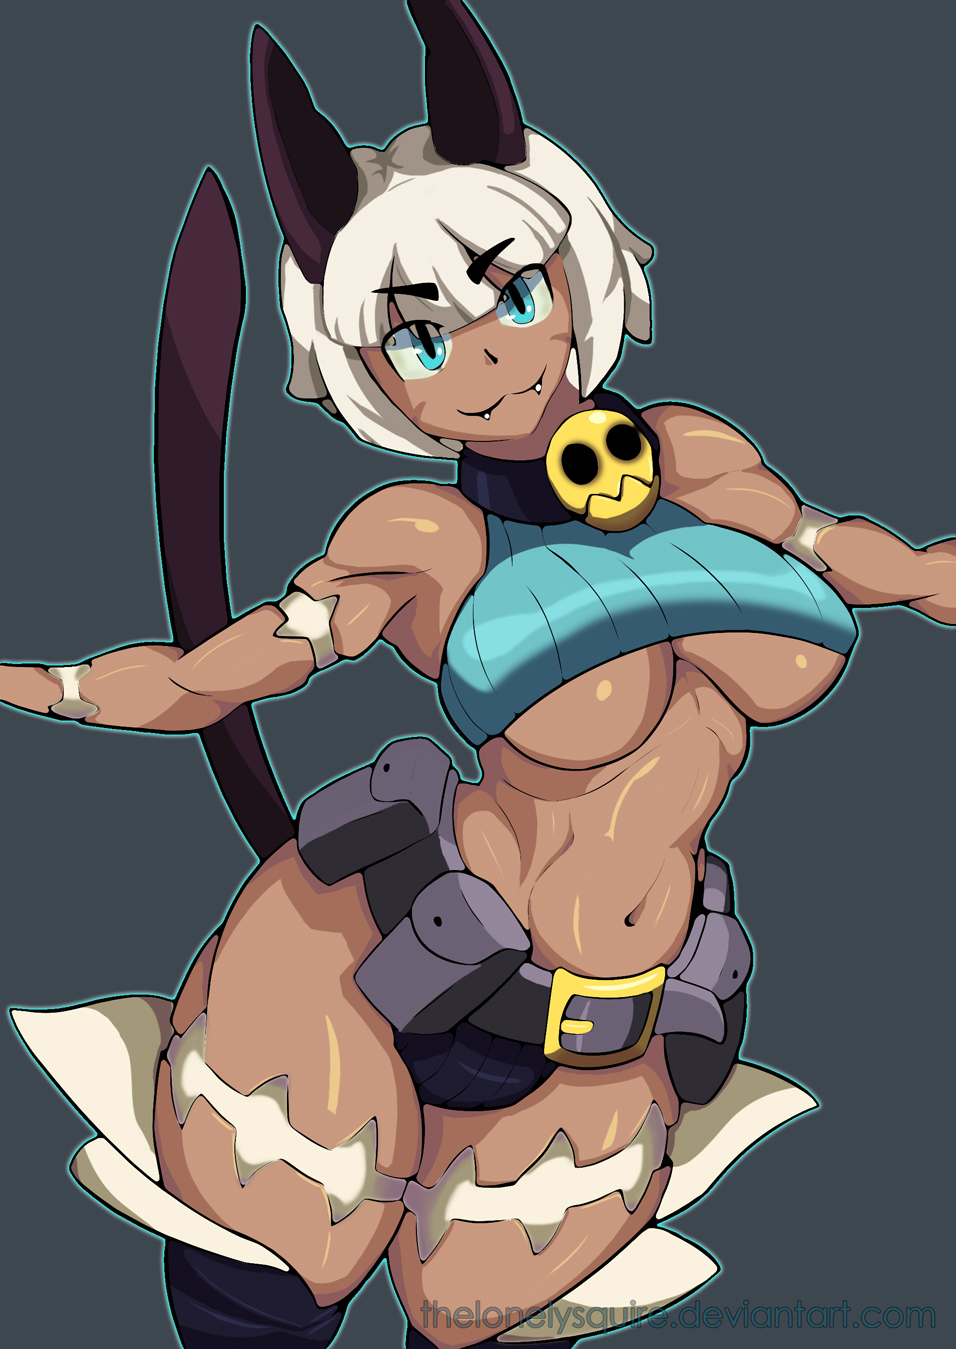 11___skull_girls___ms__fortune__commission__by_thelonelysquire-dbplsw7.jpg